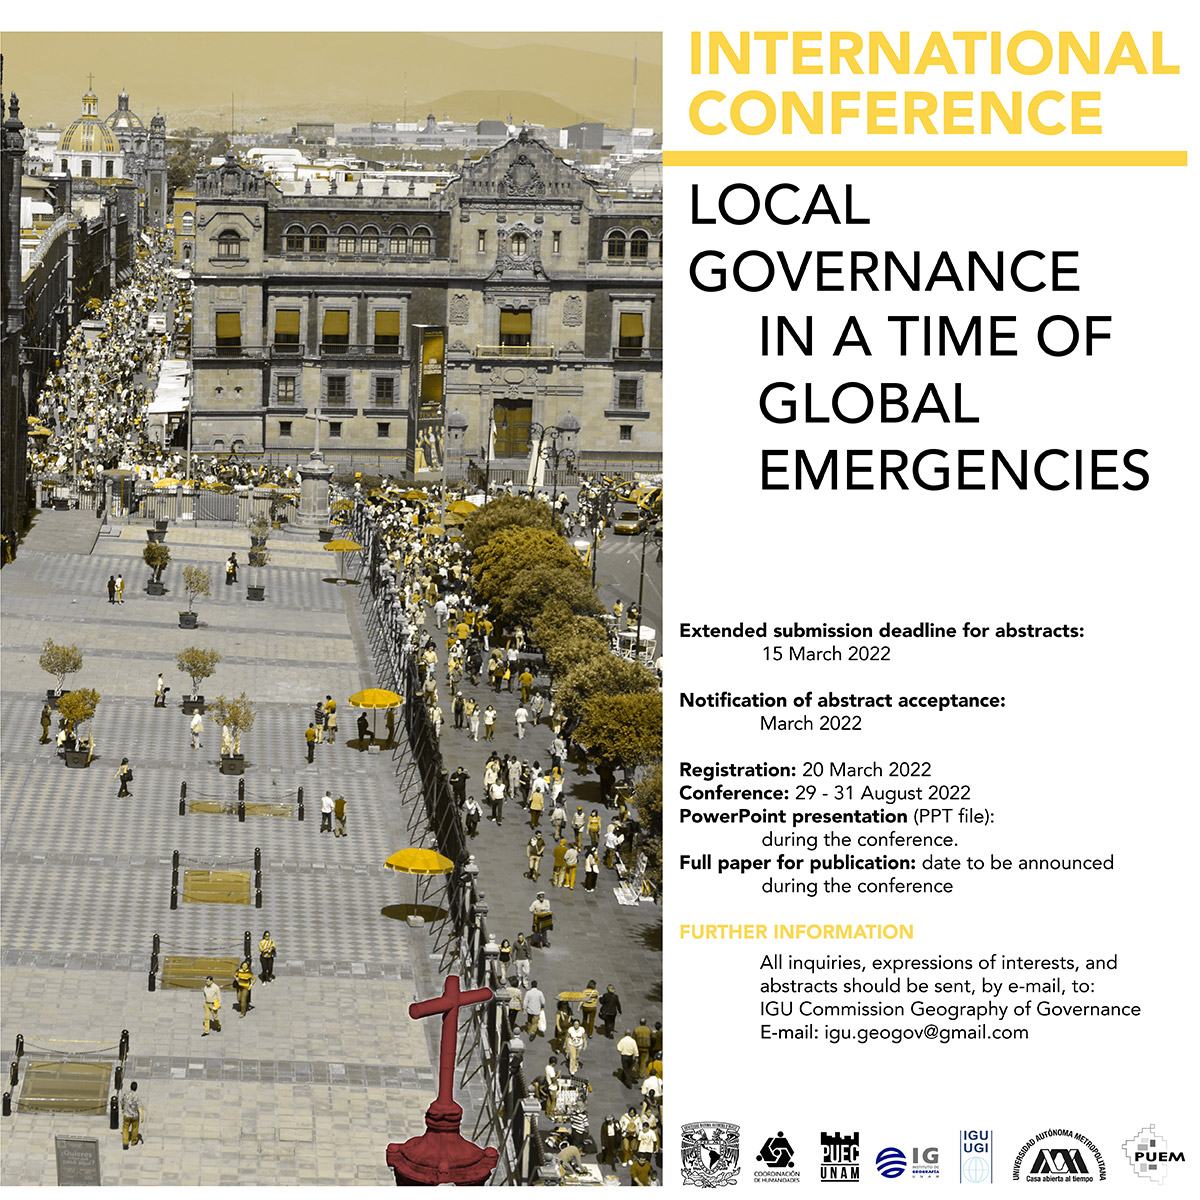 International Conference Local Governance in a Time of Global Emergencies